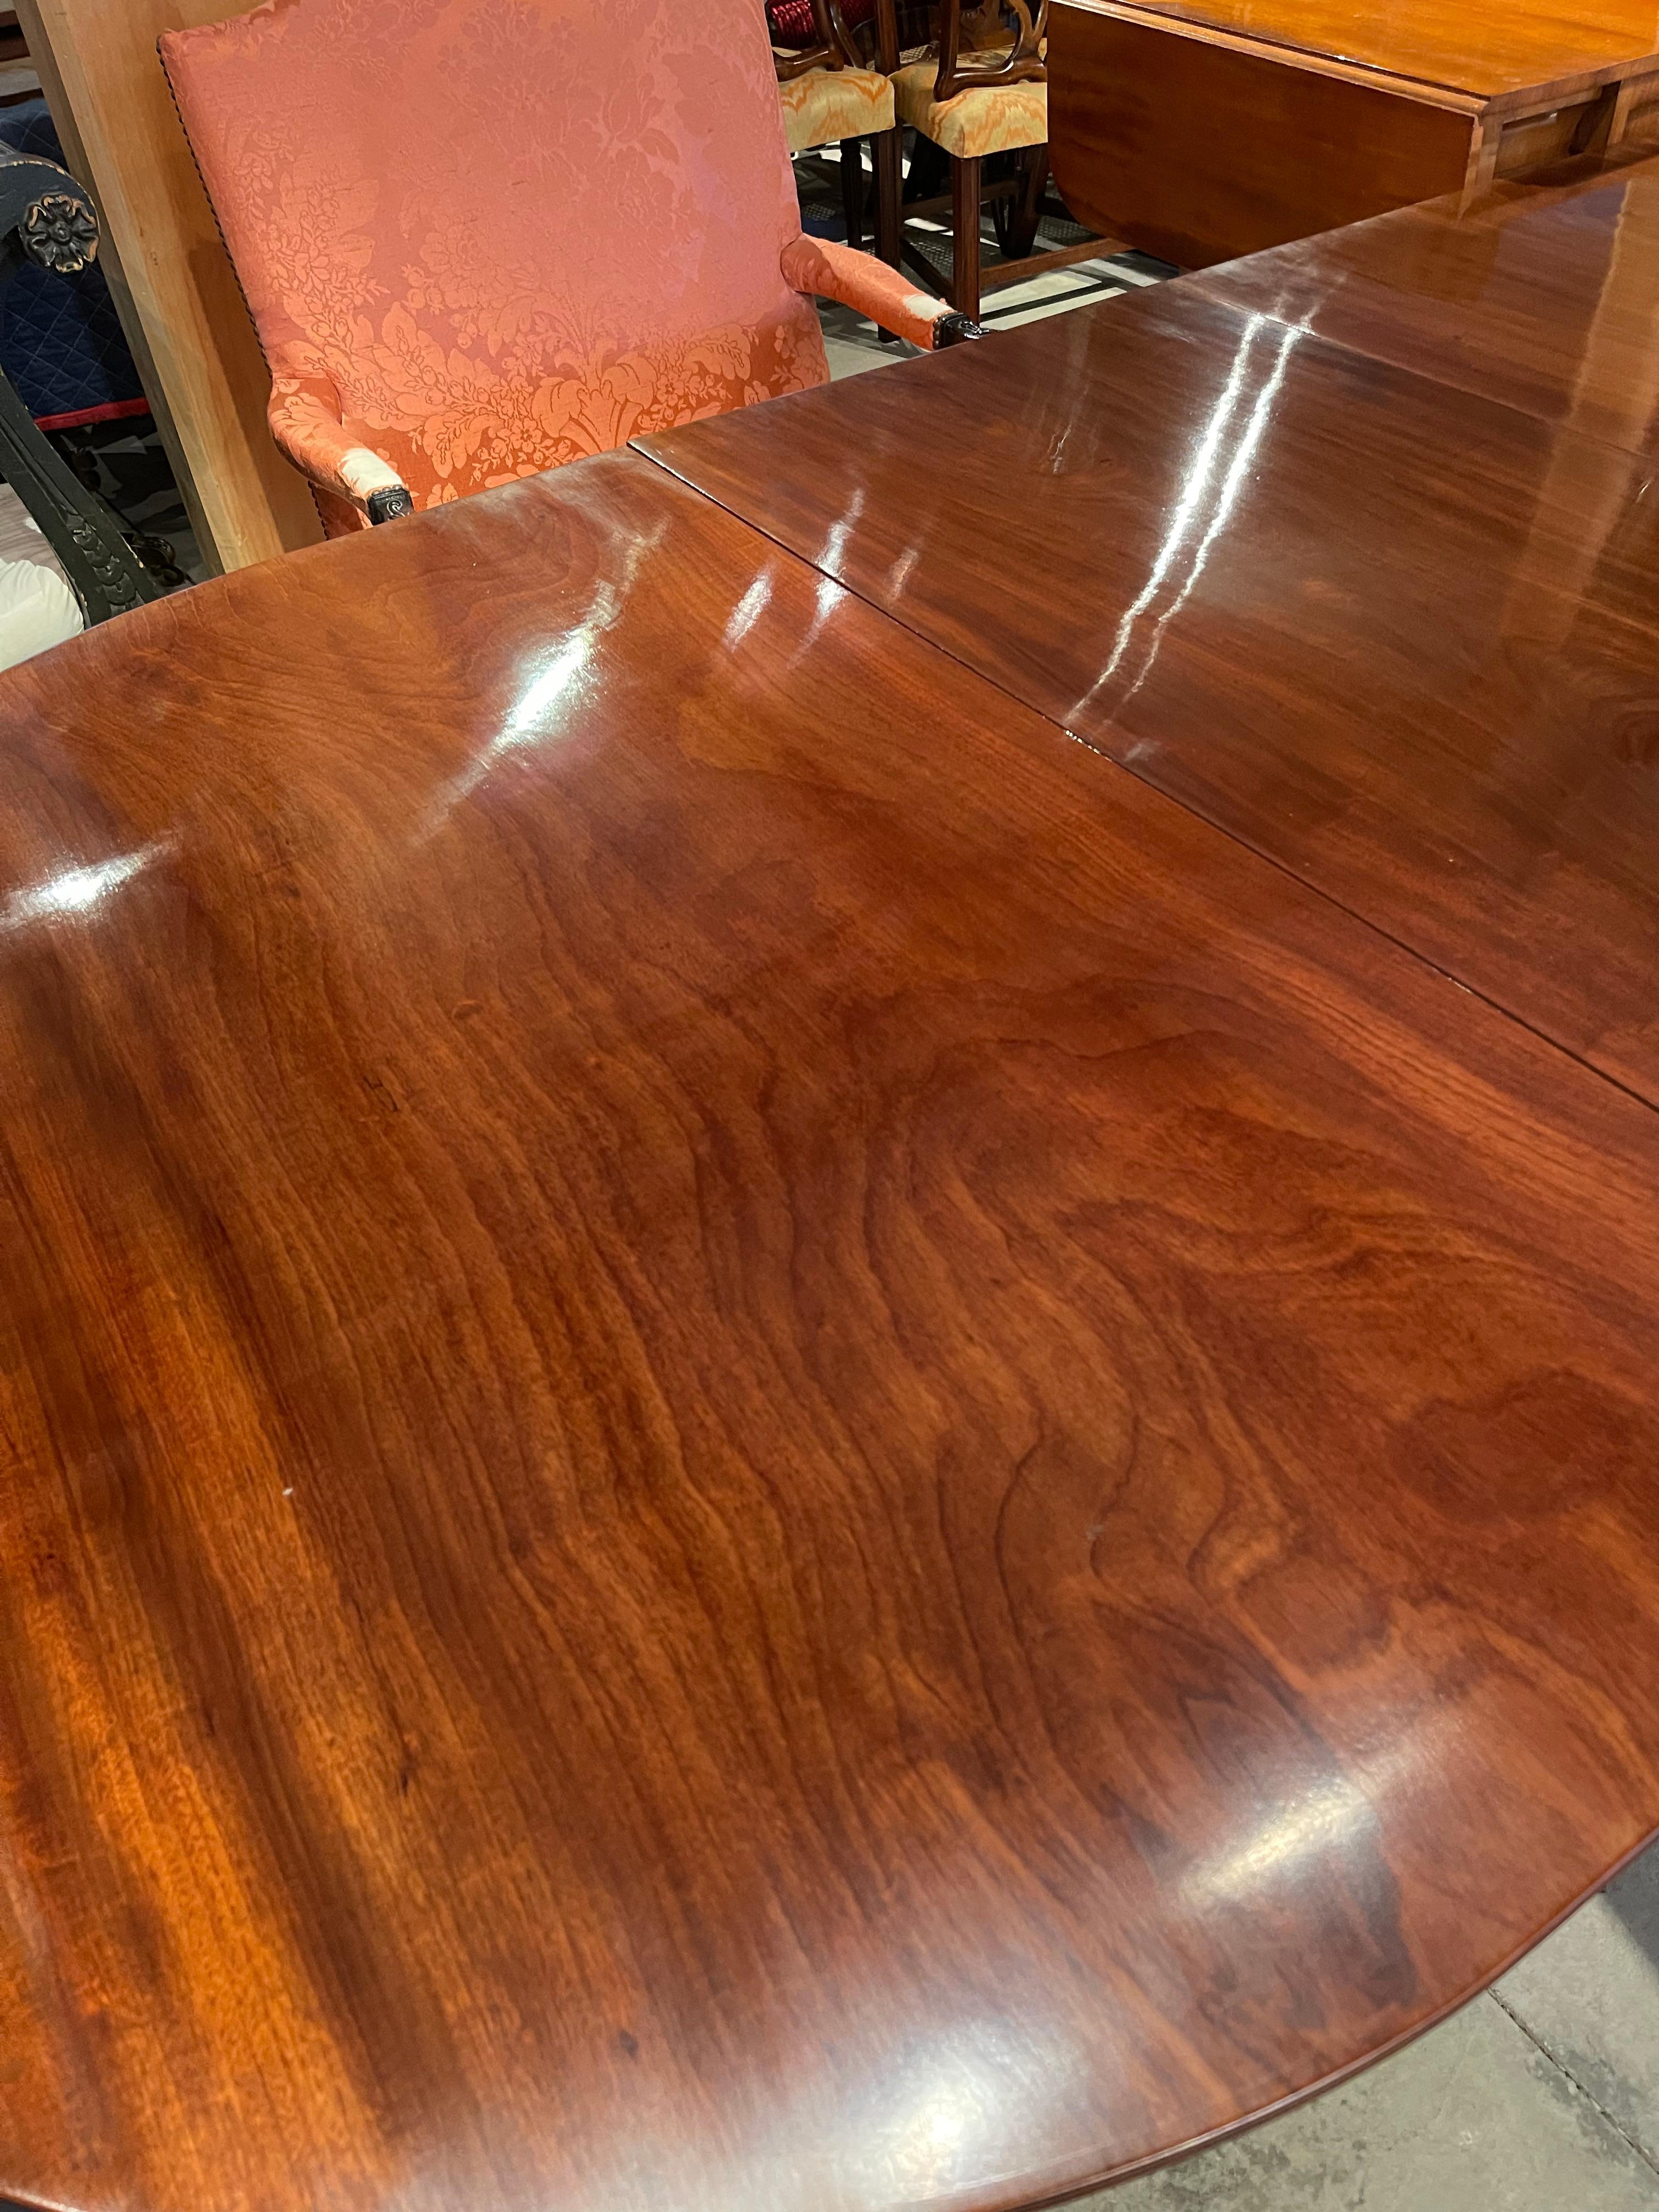 Early 19th century Regency Mahogany four pedestal dining table. Solid Mahogany Boards with well-figured early grain from old growth trees. Large board tops. Leaves original to table. 

--Photographs show table in full length and without